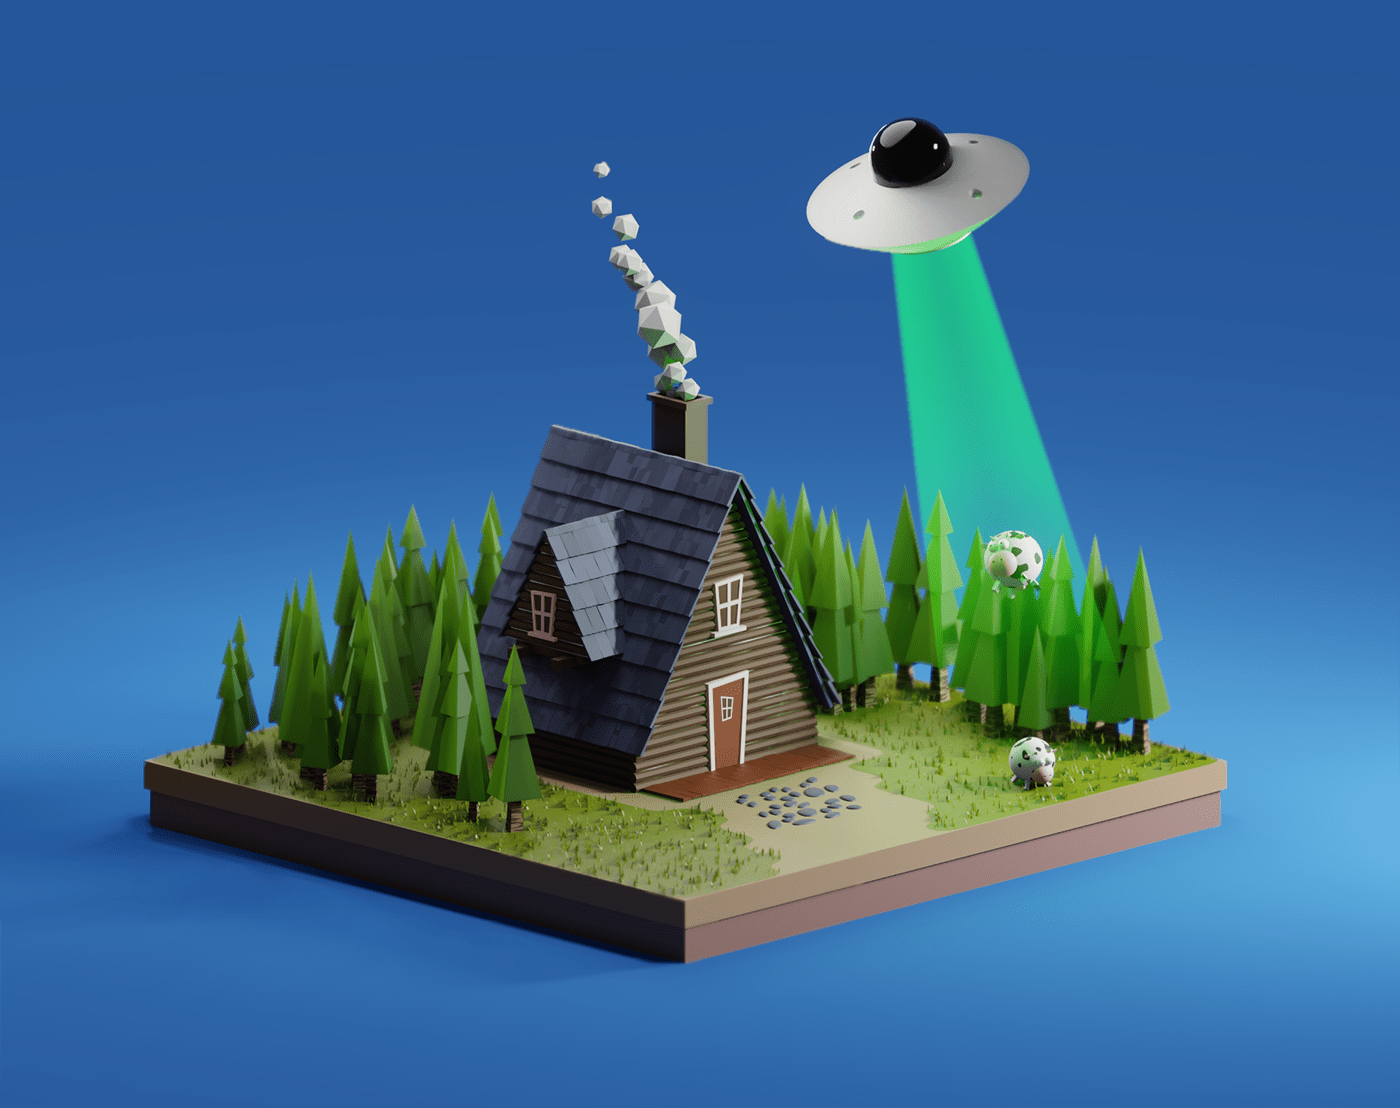 Cow abduction by aliens